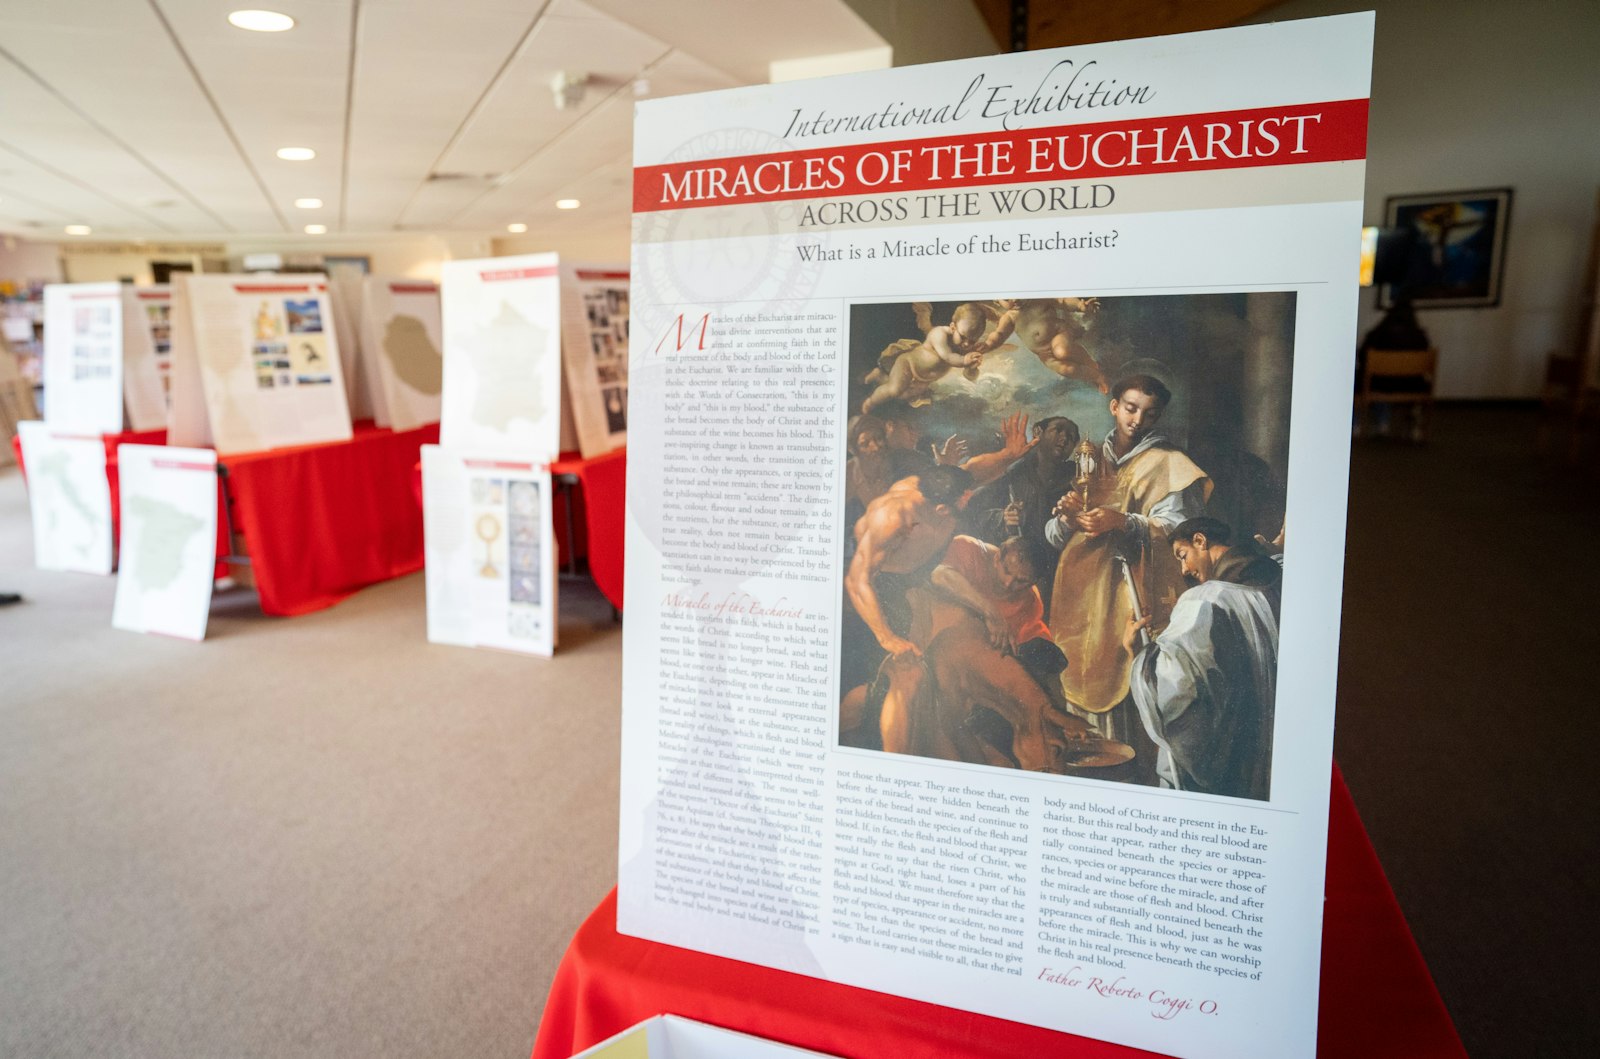 A traveling exhibit of Eucharistic miracles, pictured on display at St. Roch Parish in Flat Rock, includes 170 descriptive panels featuring more than 140 Eucharistic miracles from the Church's history. Any parish can request the exhibit, said Margy Nagel, co-founder of the Real Presence Apostolate of Michigan.